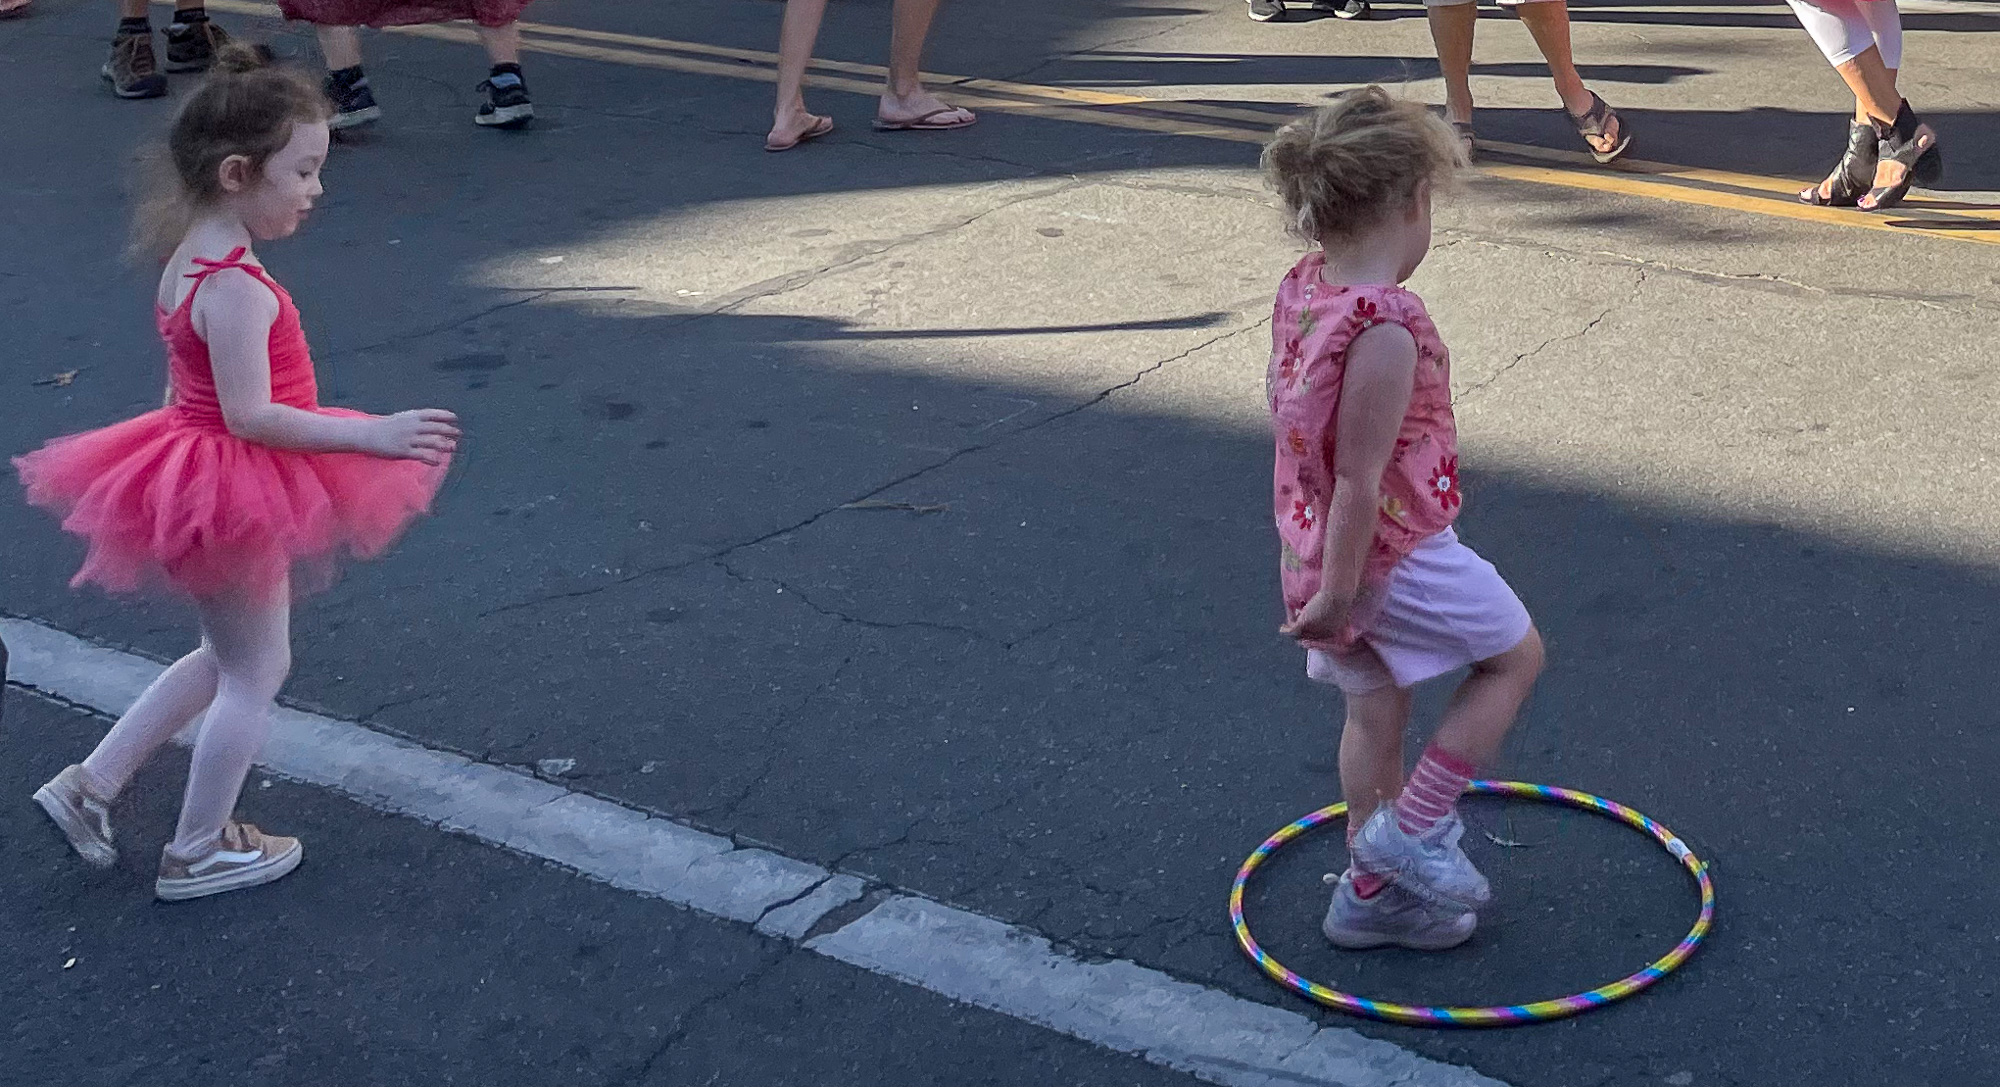 Hula hoops and ballerinas - what could be better!